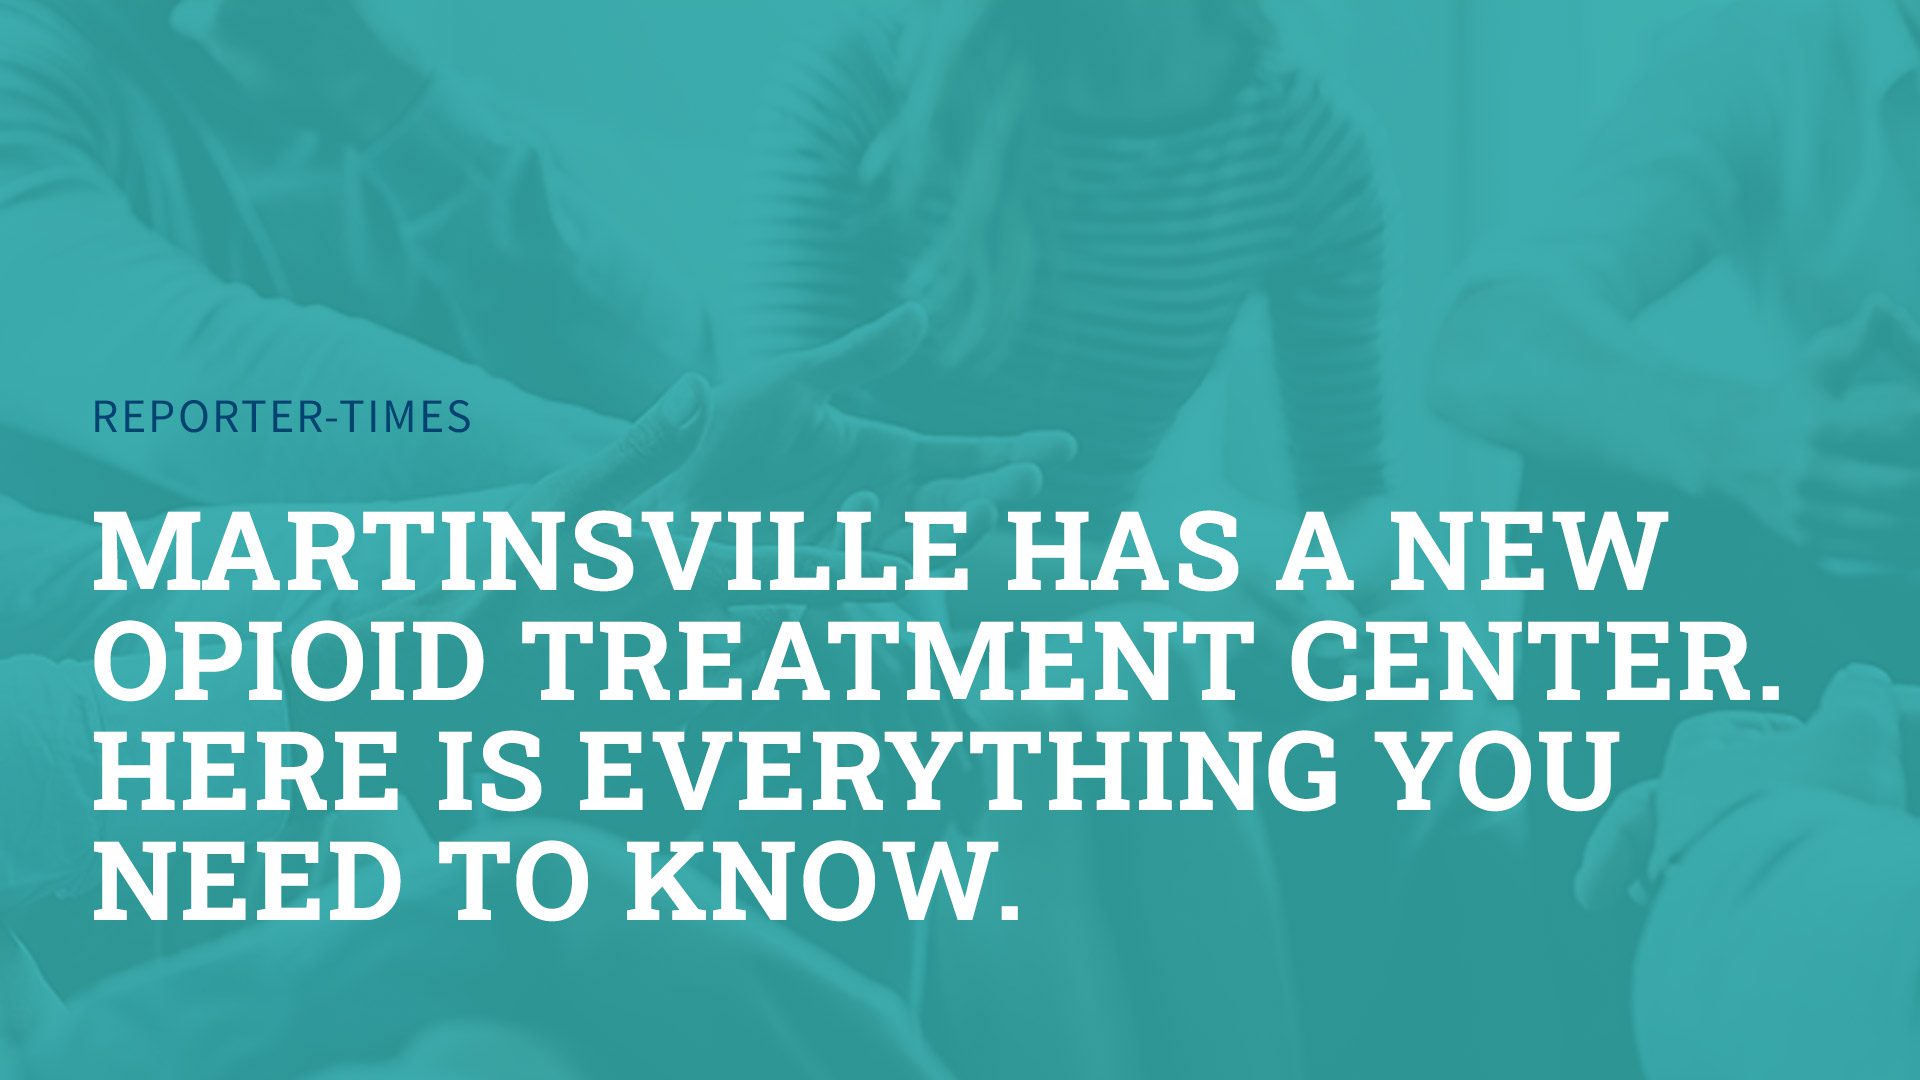 Martinsville Has a New Opioid Treatment Center. Here is Everything You Need to Know.